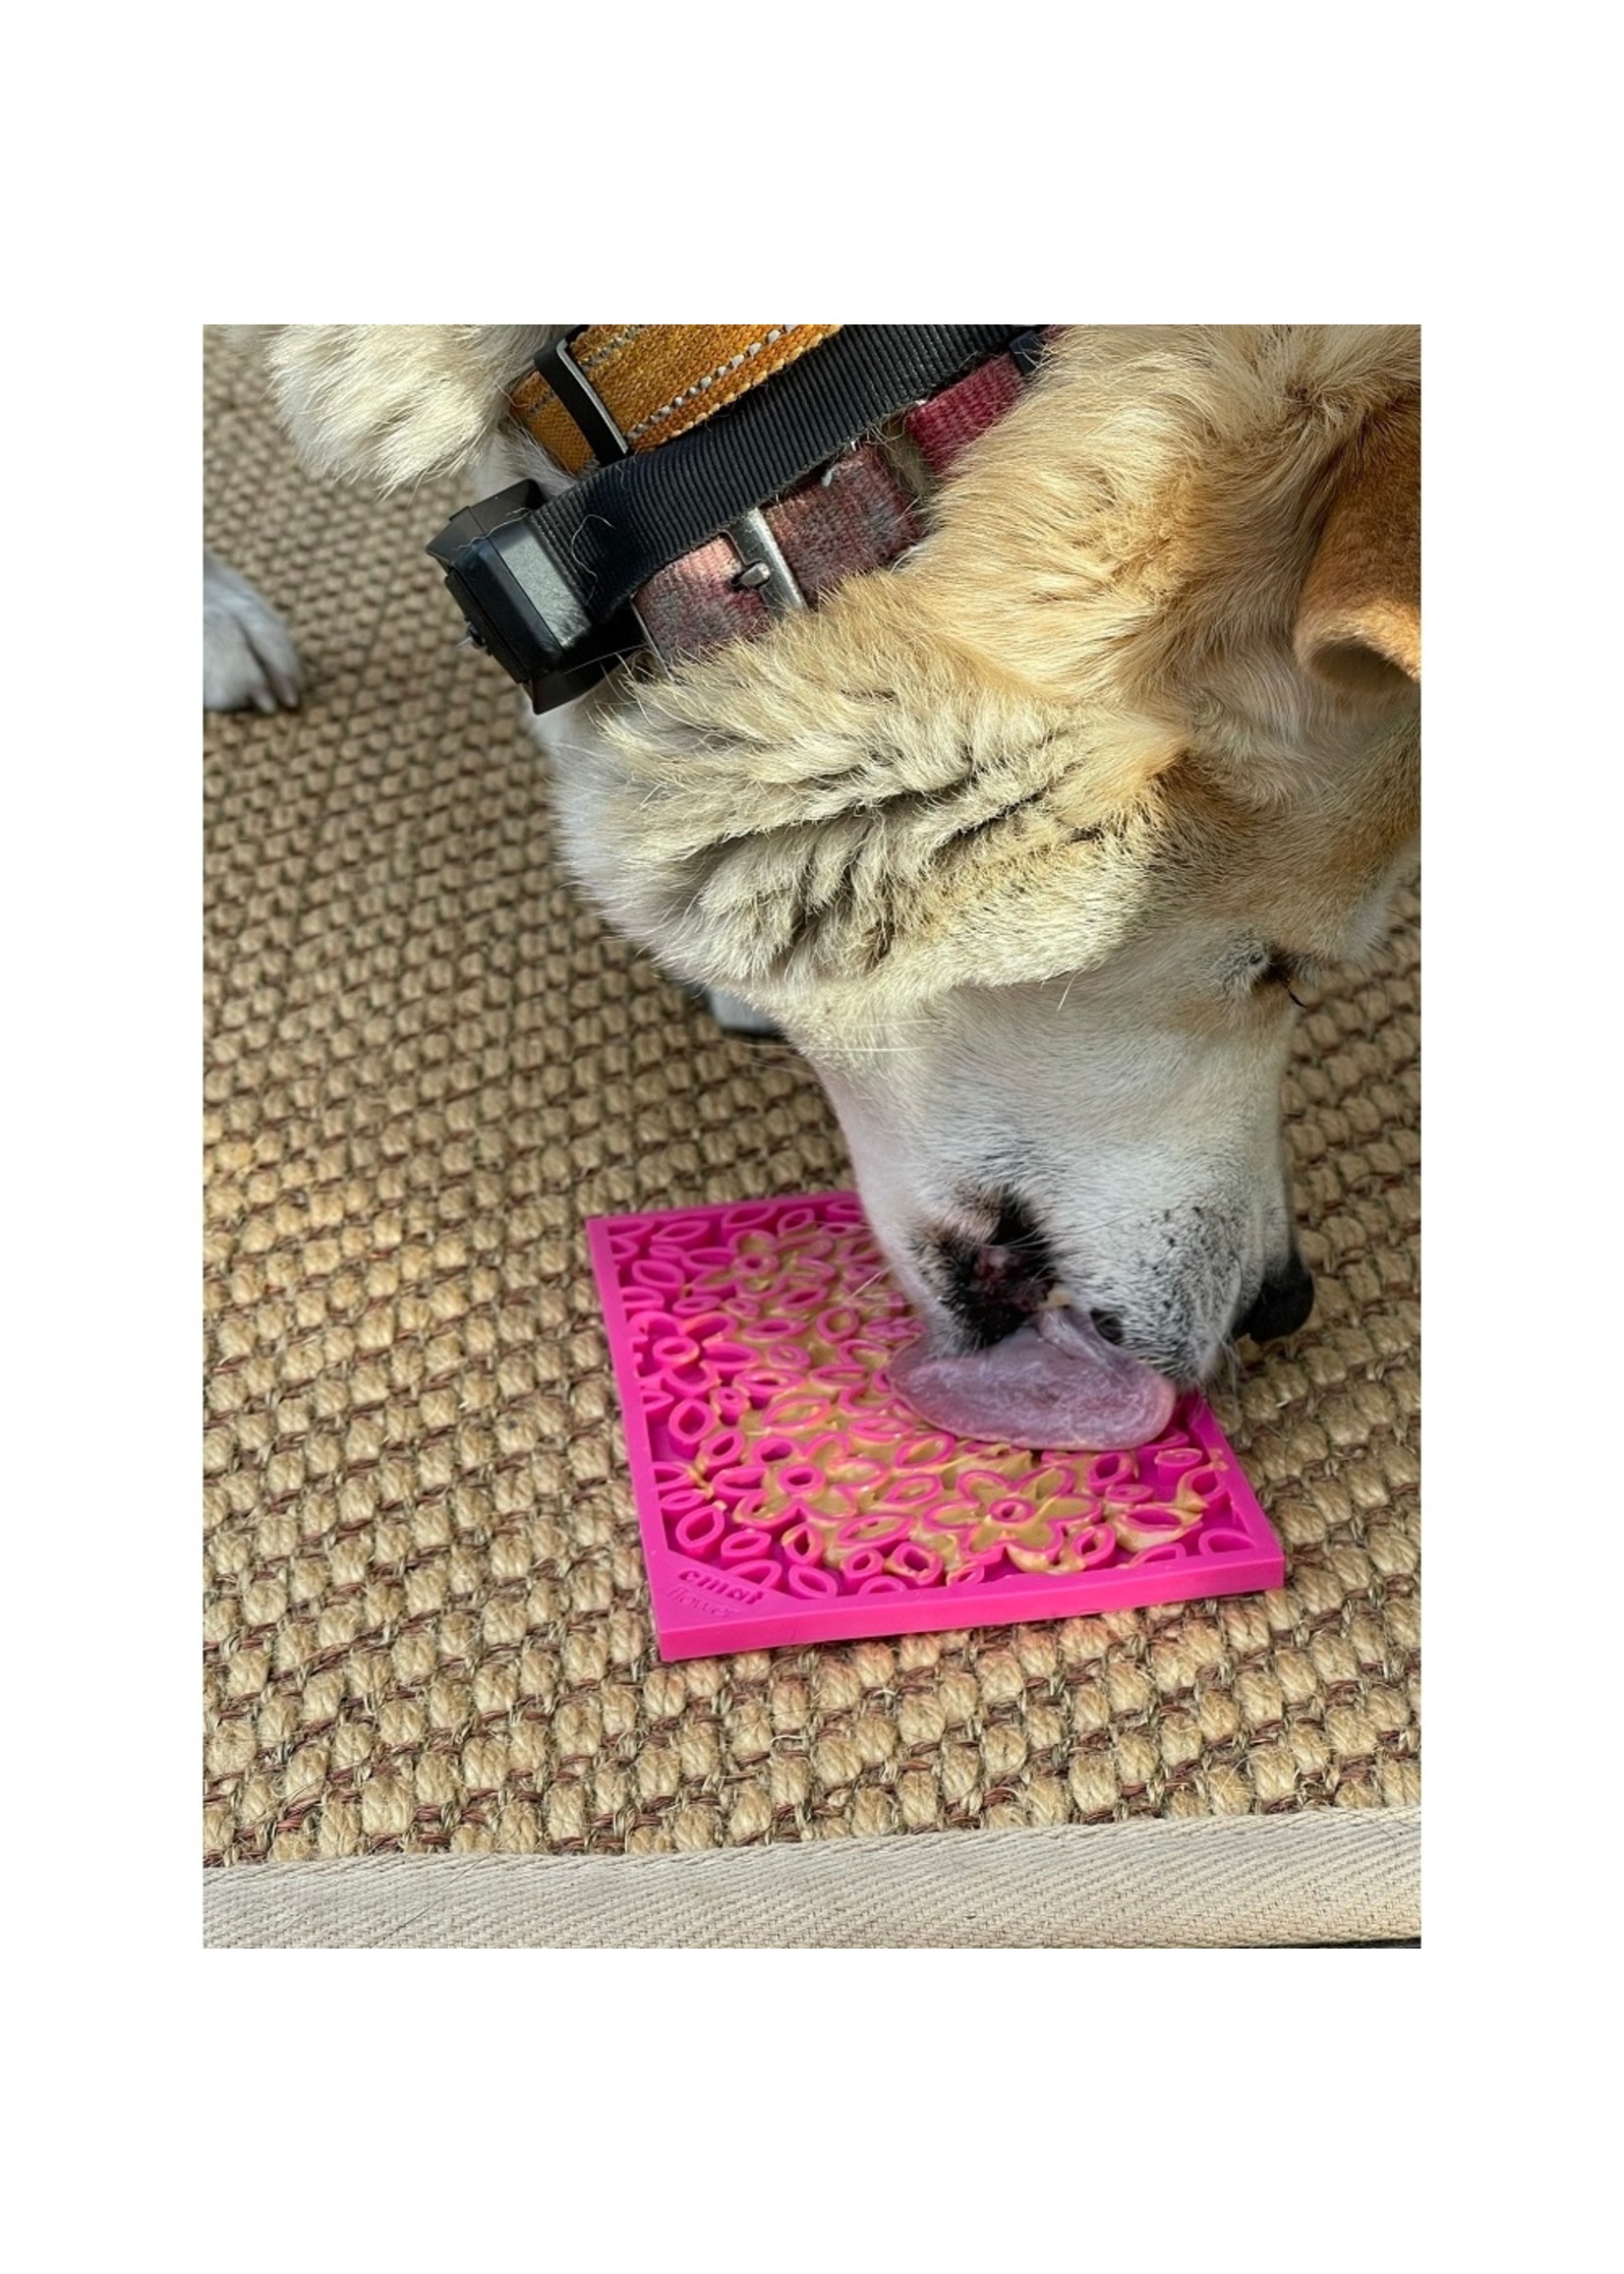 SODA PUP, Flower Power Lick Mat (Made in the USA)